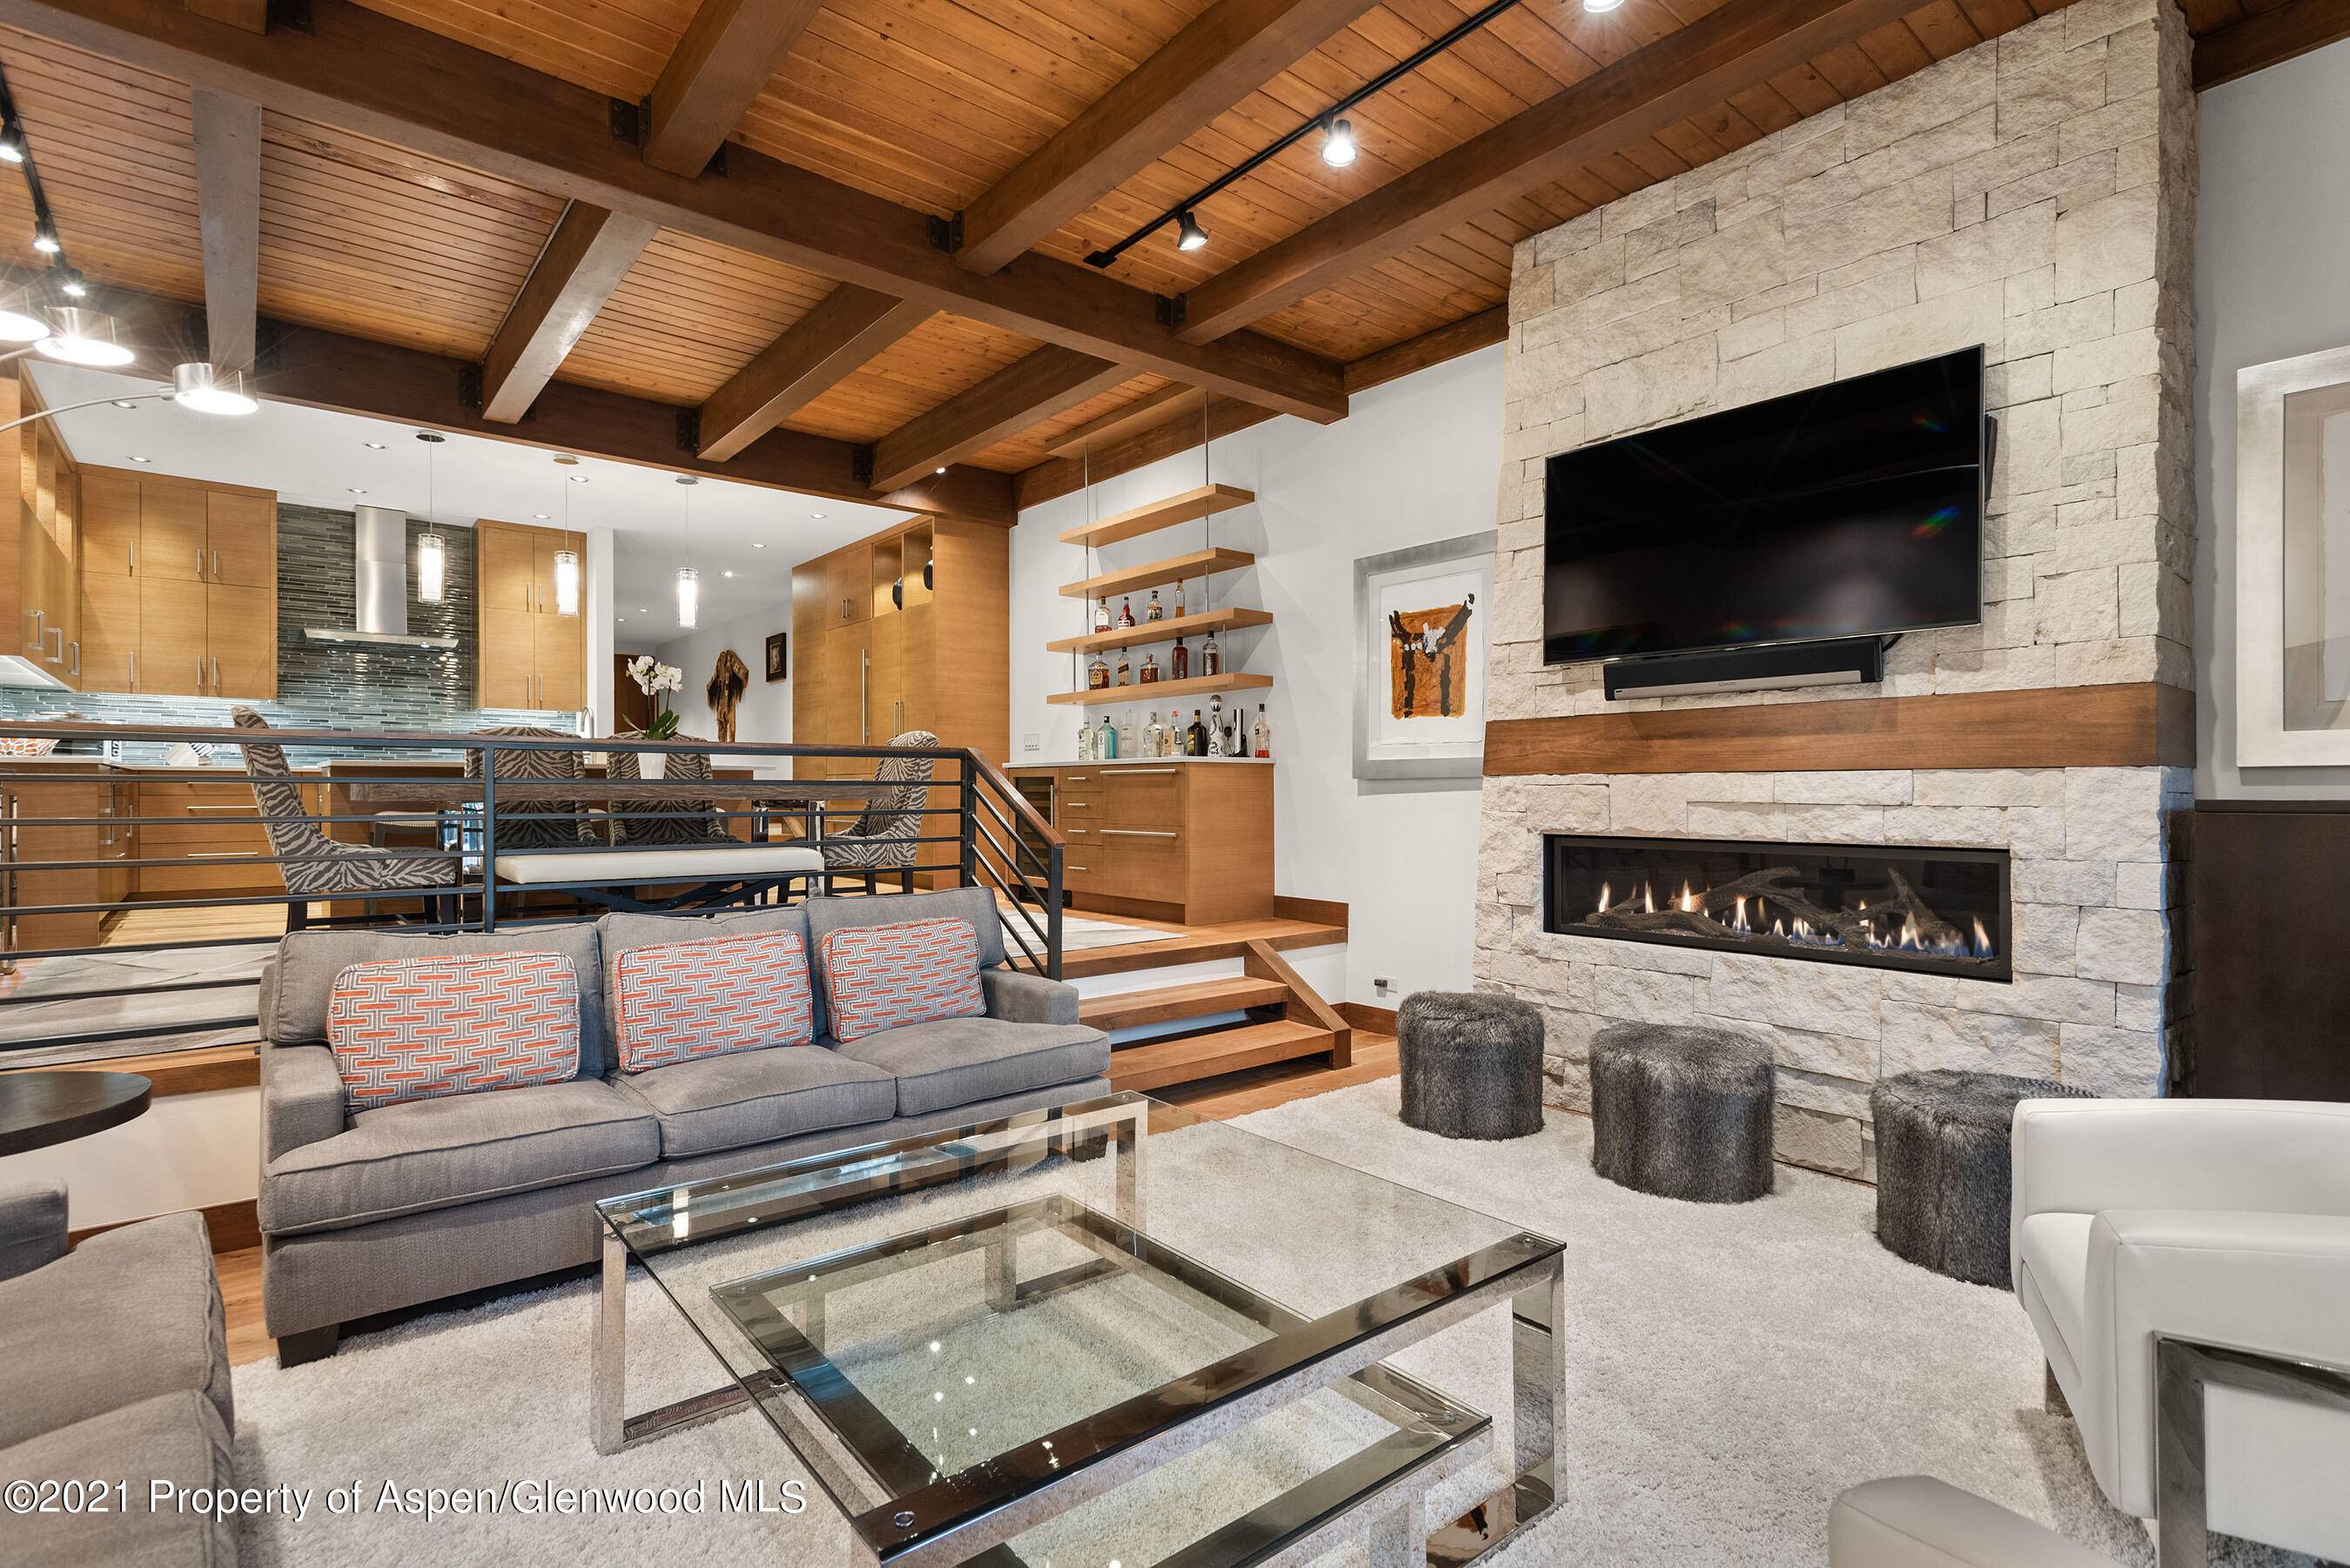 This ski access townhome was remodeled to the studs and offers an extraordinary mountain modern interior with high end finishes.